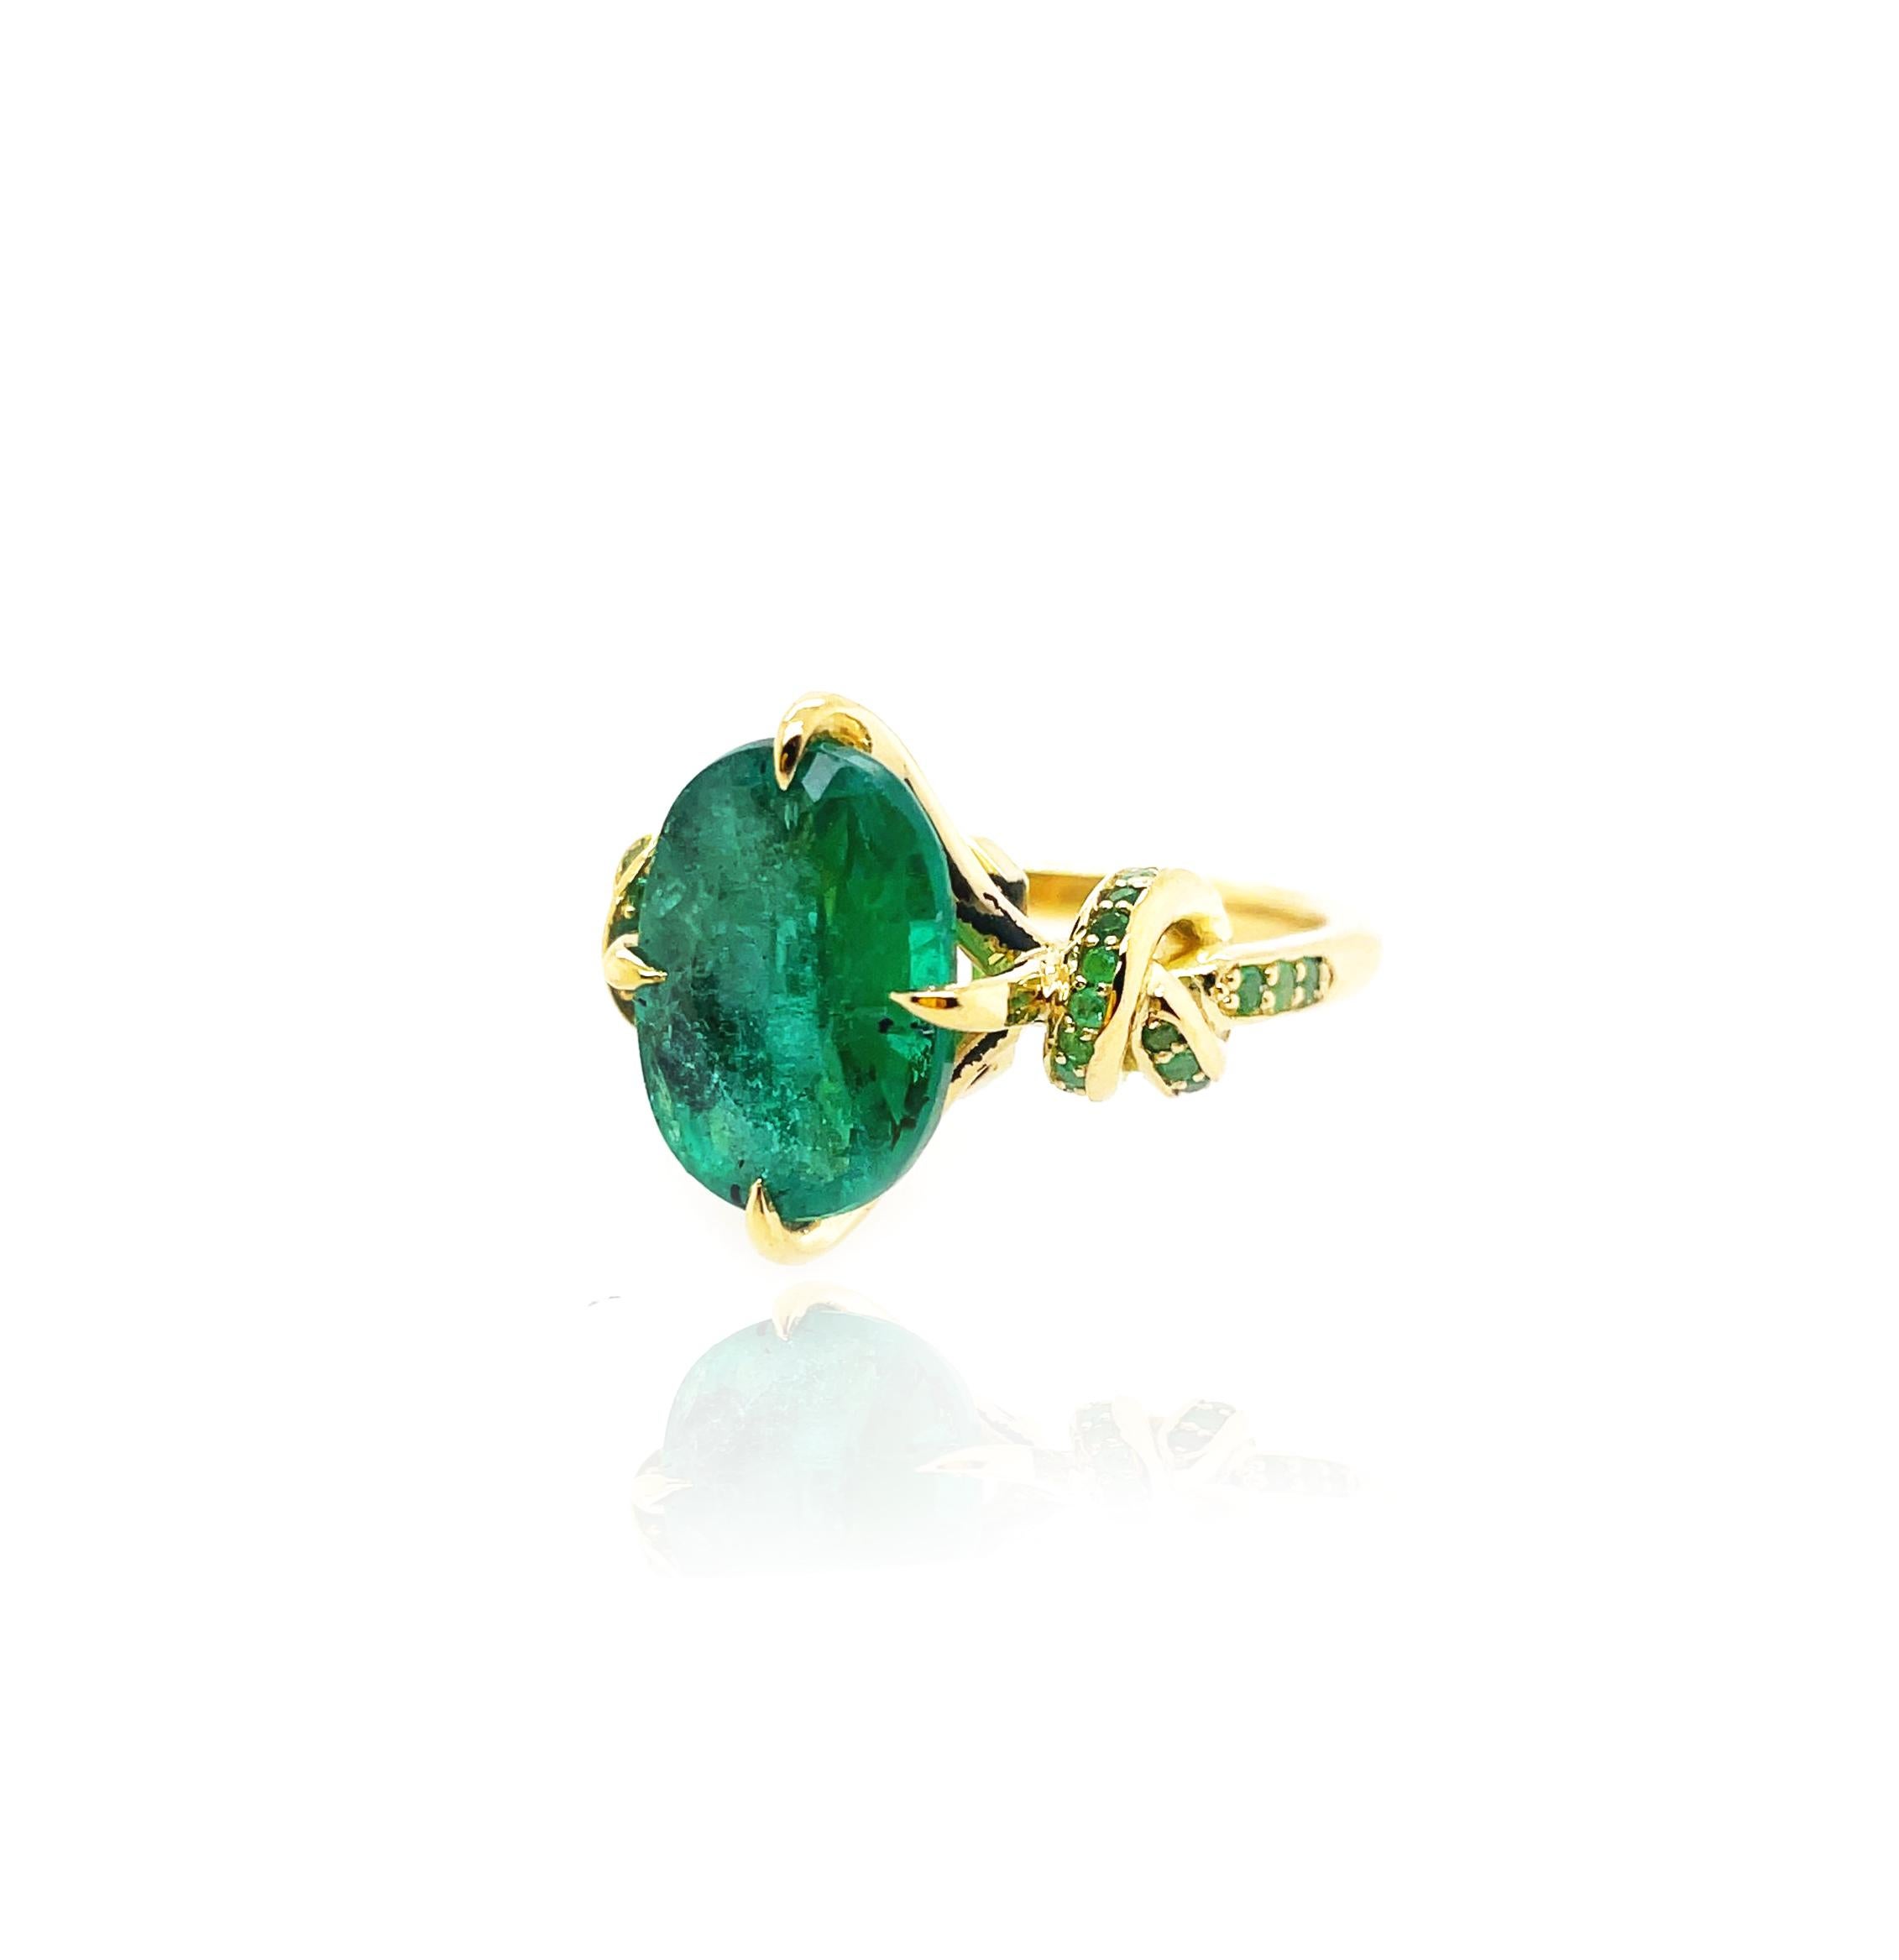 Our showstopper 4.01ct Natural Emerald 